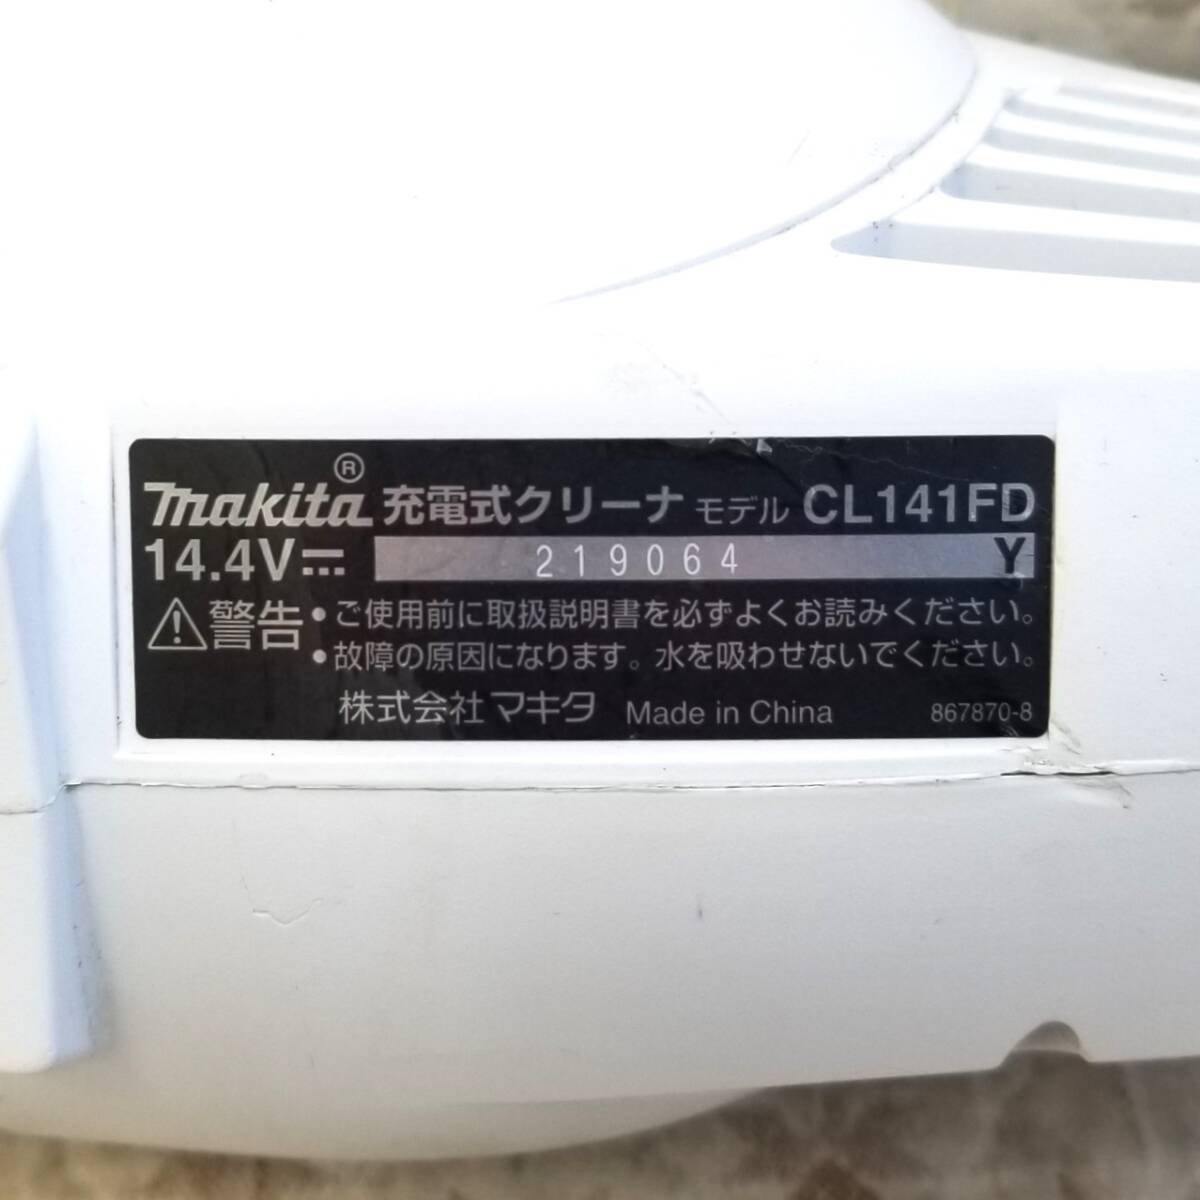 [791] secondhand goods Makita rechargeable cleaner CL141FD